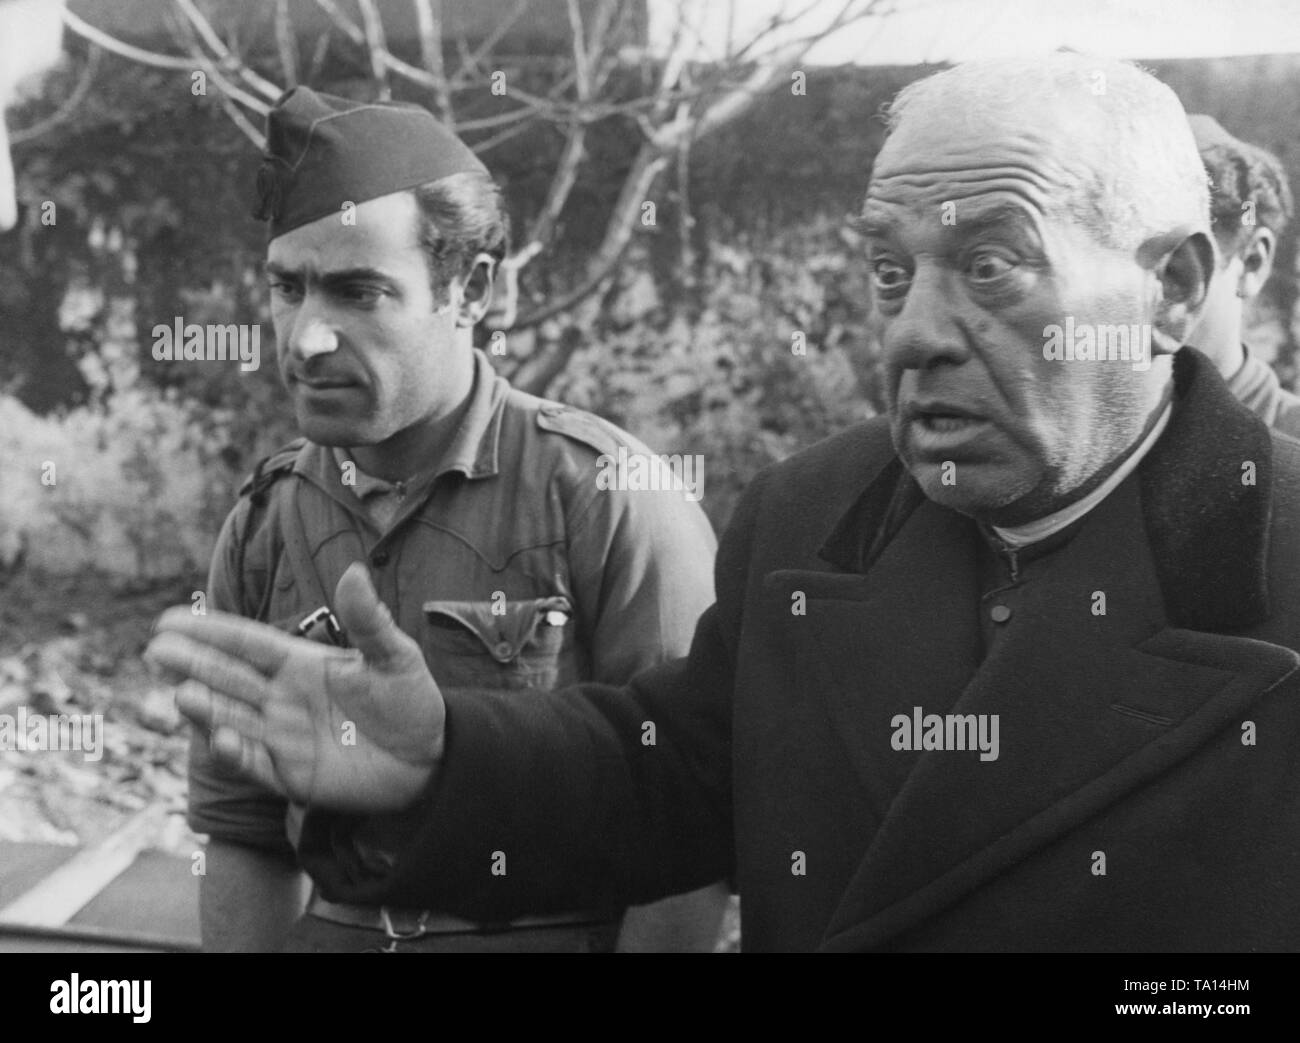 A Catholic Spanish priest in a black soutane and coat (right) tells Spanish soldiers something with eyes wide open. On the left, a French soldier of Franco's troops (with a Gorillo cap). Stock Photo